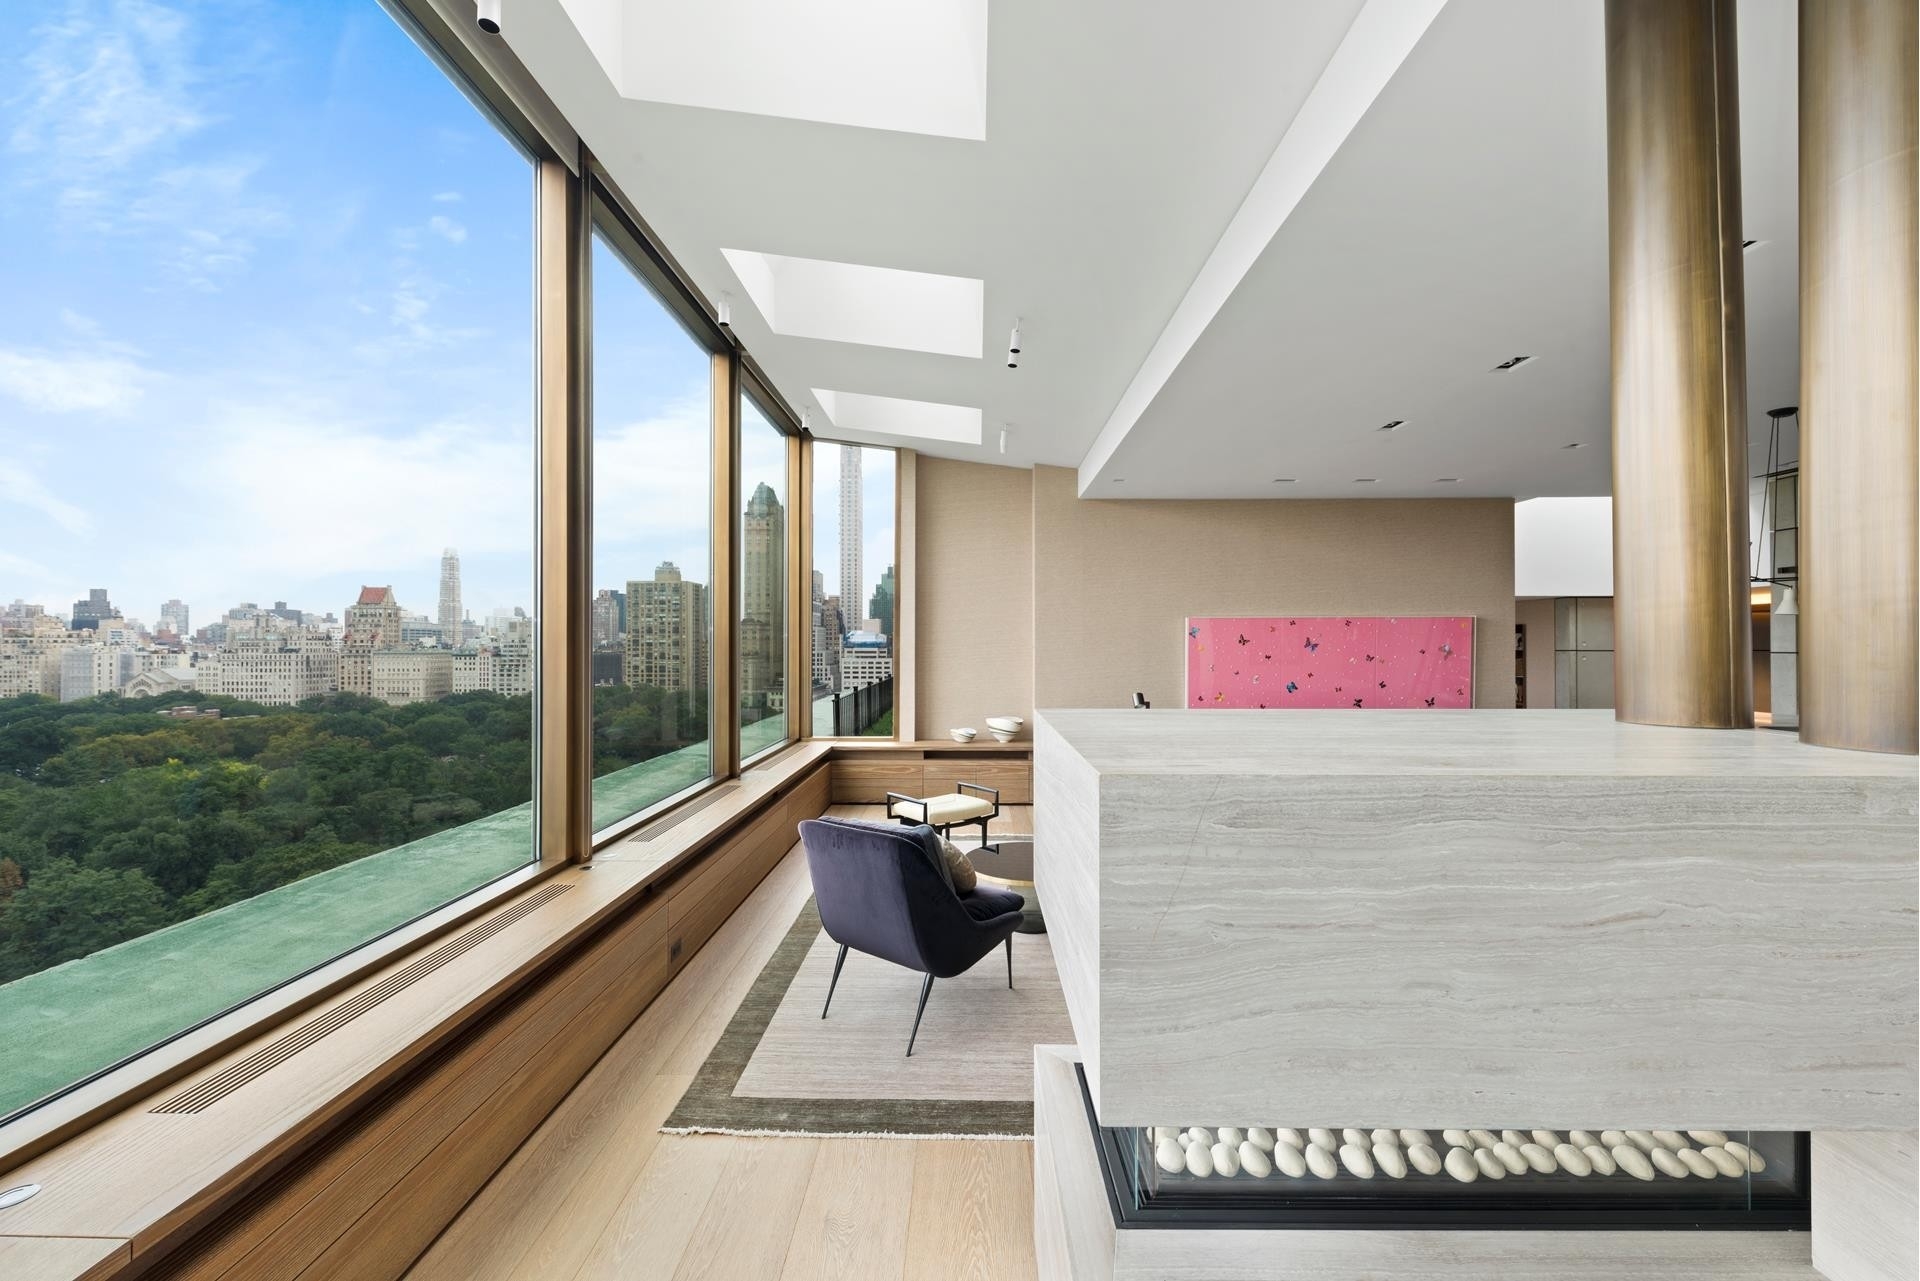 18. Co-op Properties for Sale at 128 CENTRAL PARK S, PH Central Park South, New York, New York 10019